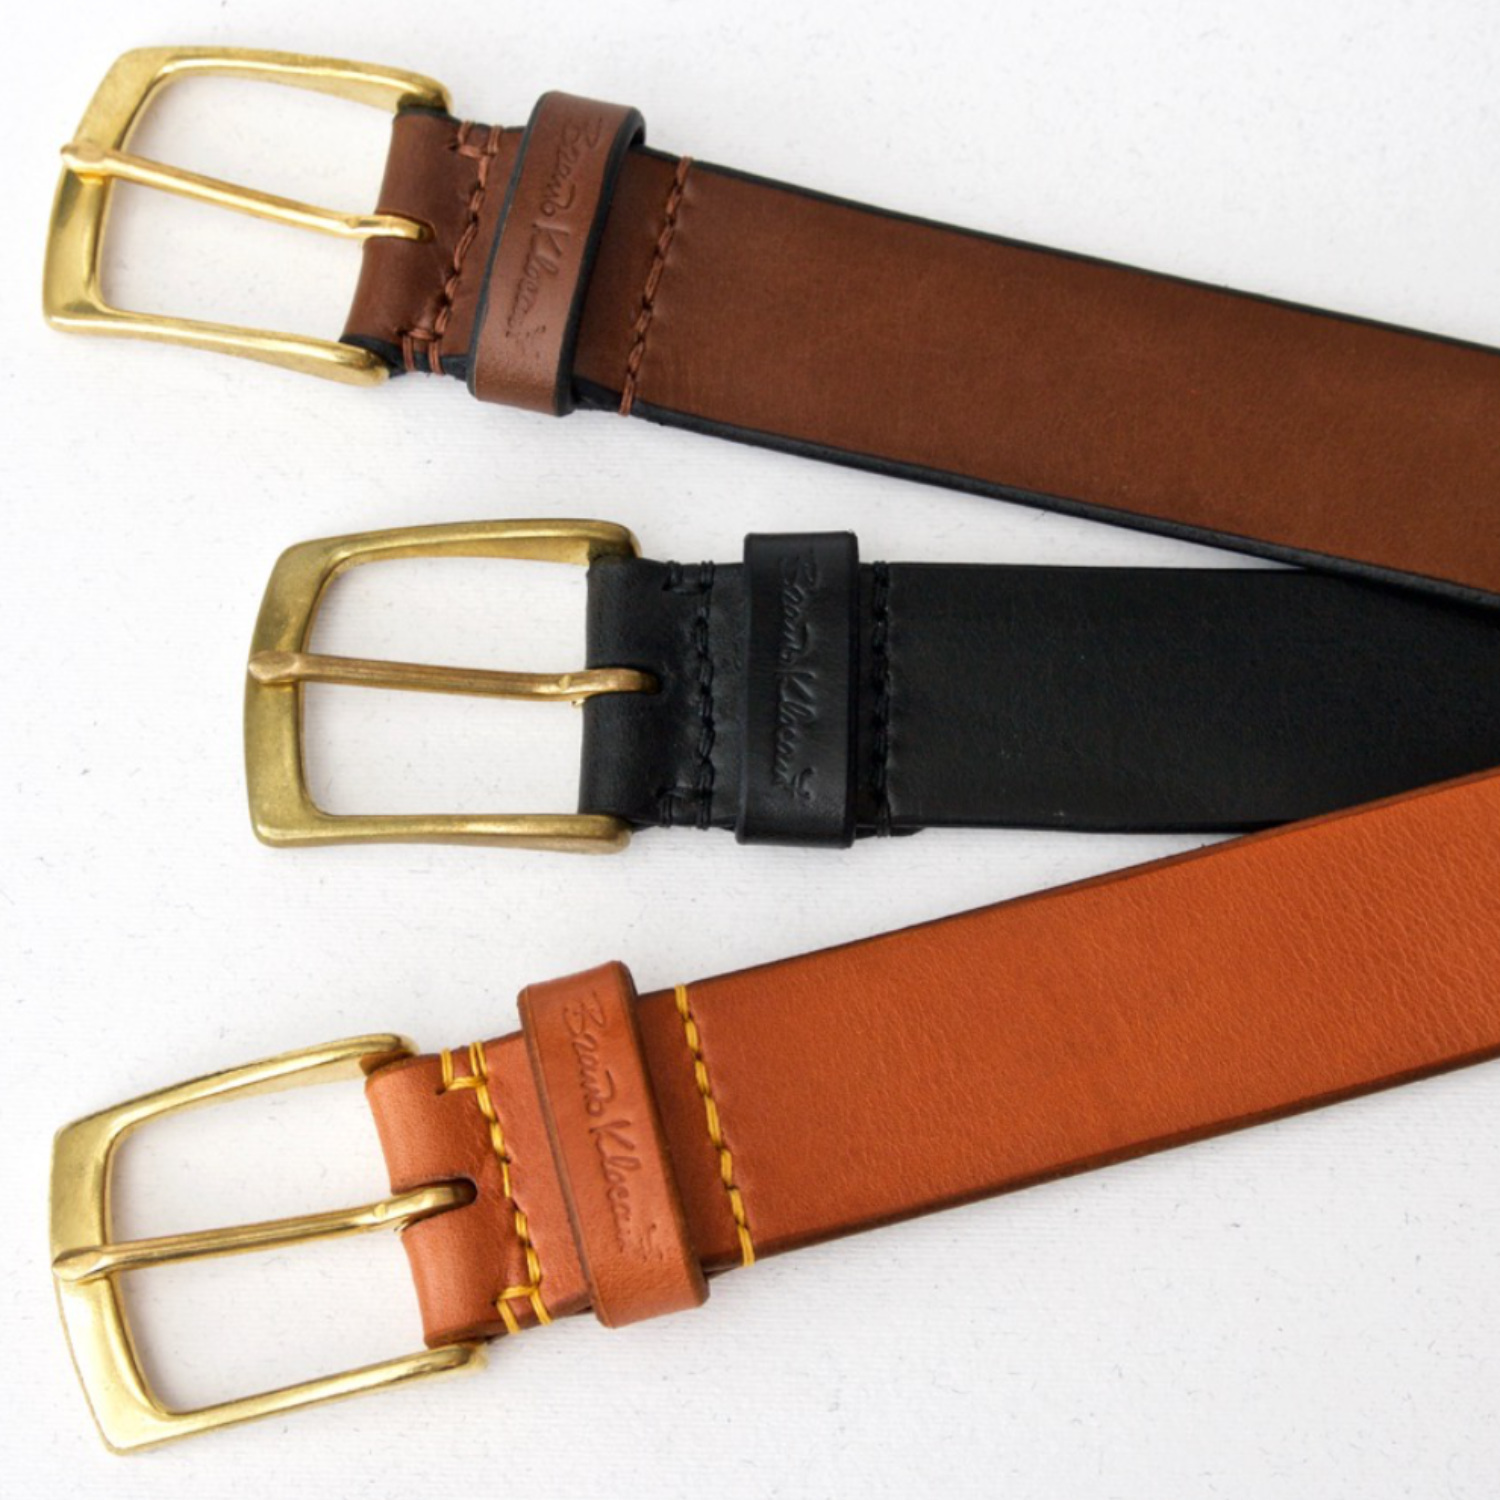 three leather belts with brass buckles